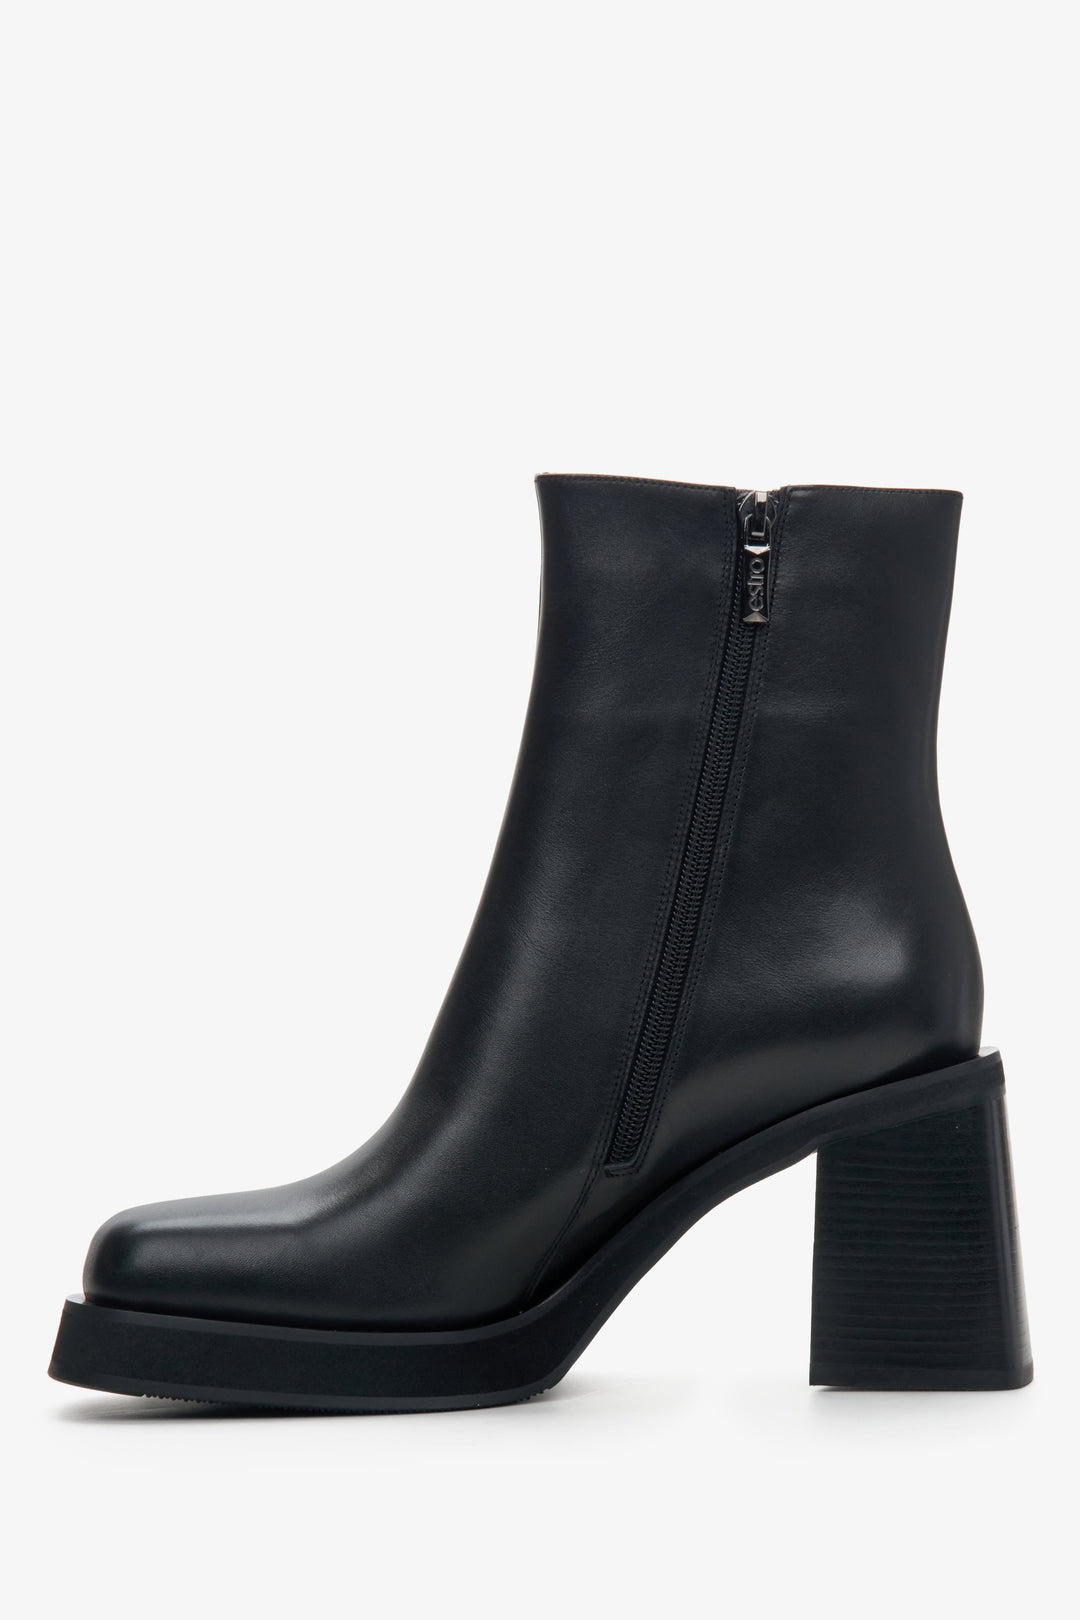 Women's black leather  boots with a heel by Estro - shoe profile.